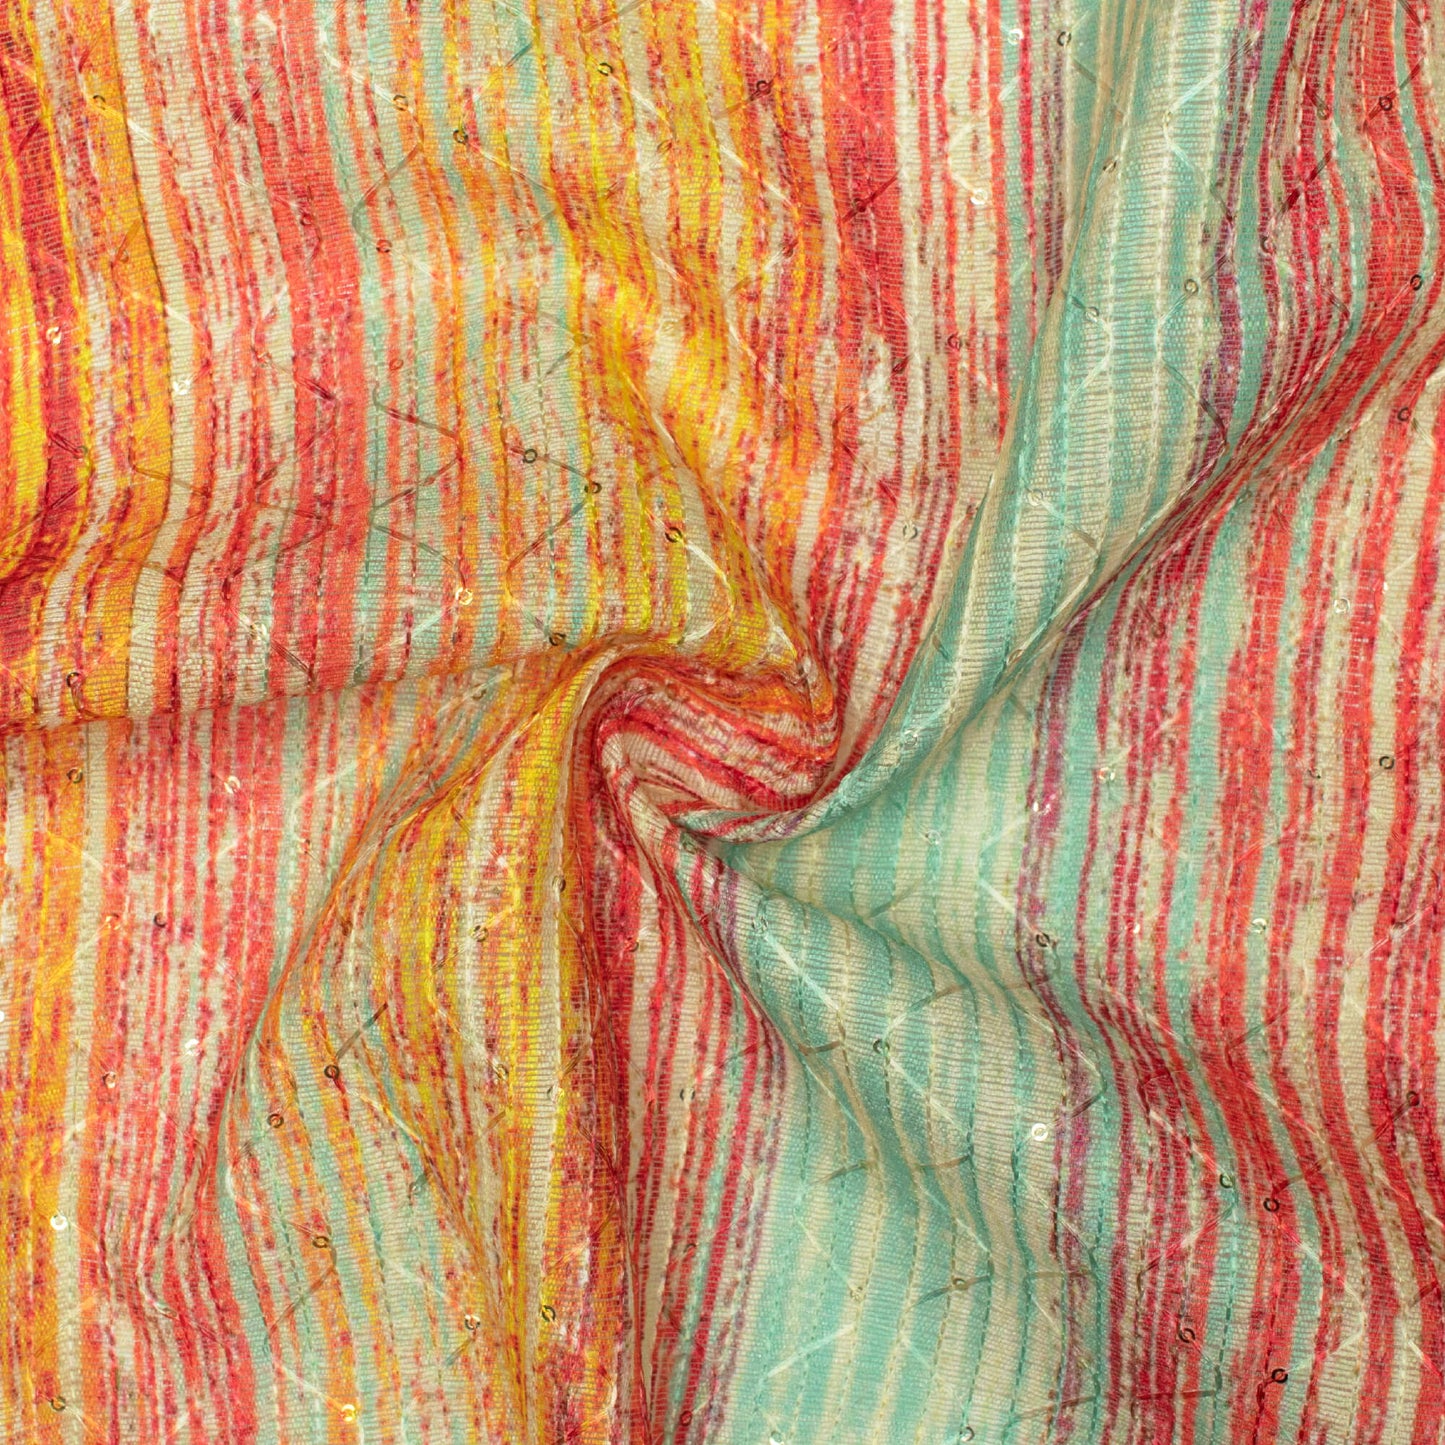 Canary Yellow And Cherry Red Stripes Pattern Digital Print Sequins Embroidery Banglori Art Silk Fabric